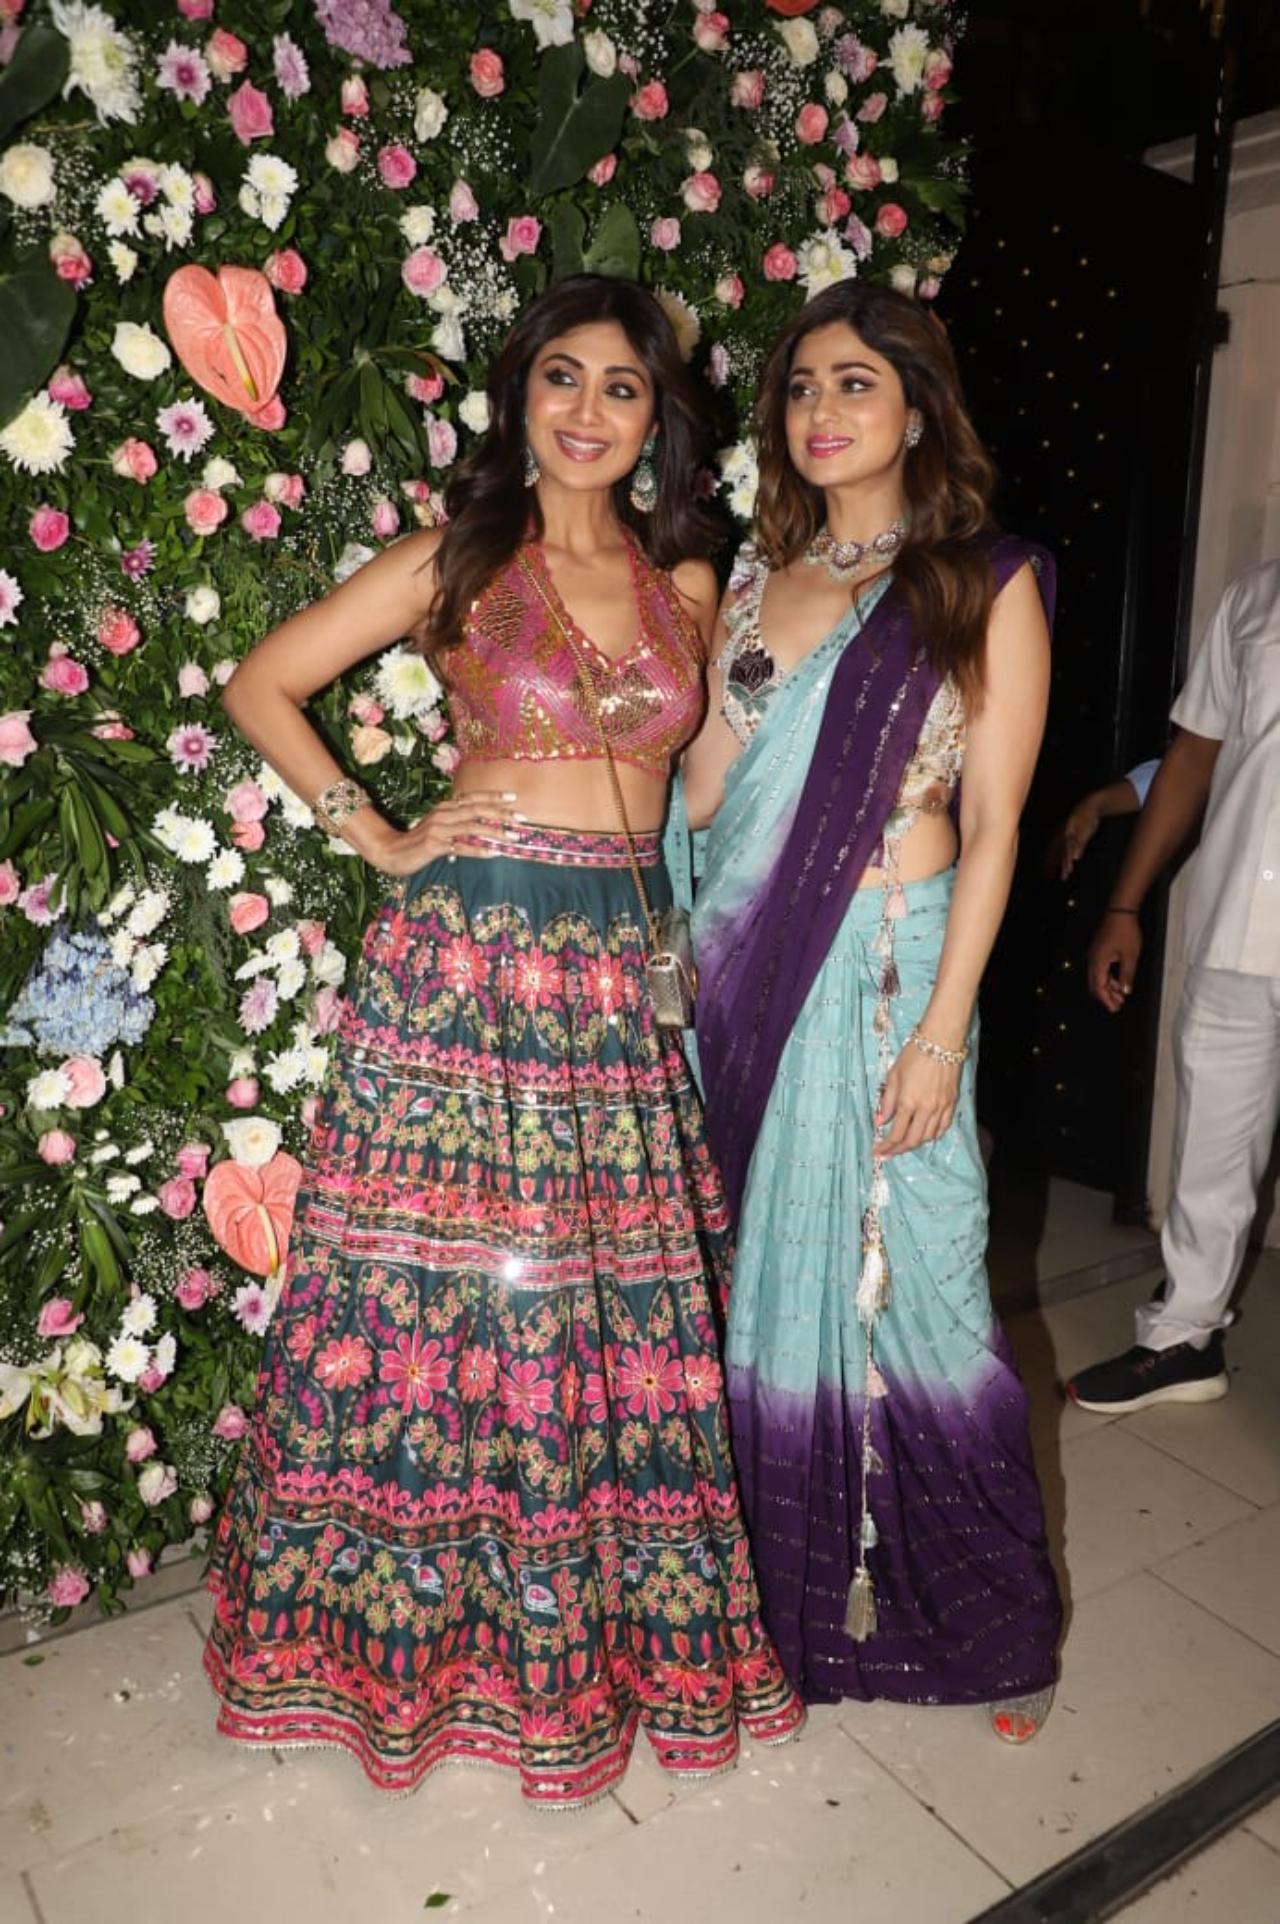 The Shetty sisters- Shilpa and Shamita- had their style game on